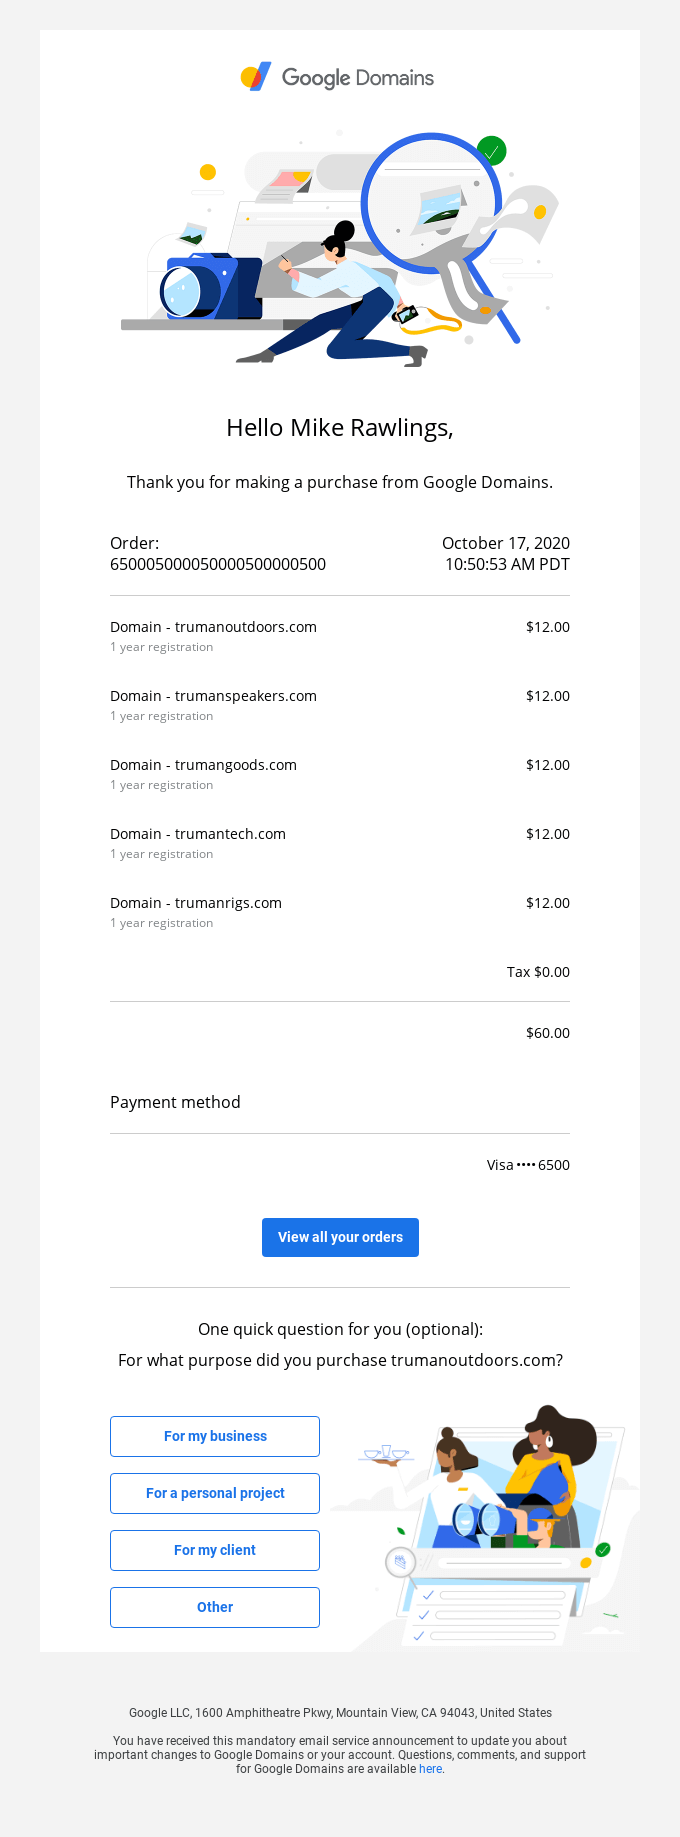 Your Google Domains Purchase Receipt